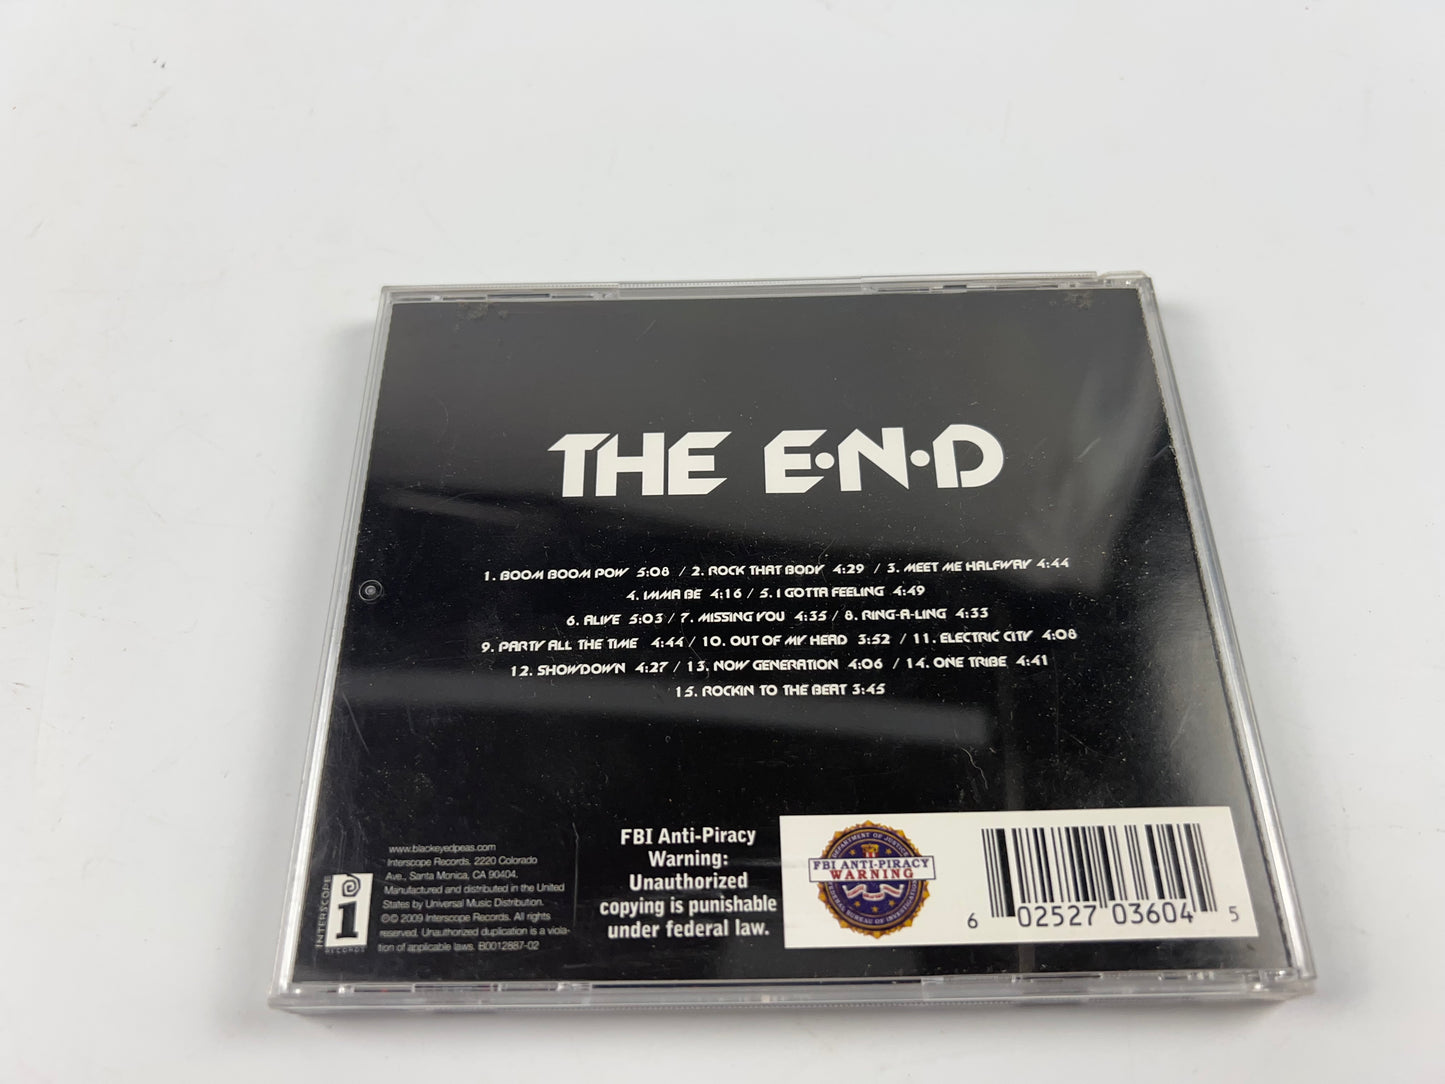 The Black Eyed Peas The E.N.D. - Energy Never Dies by  (CD, 2009)